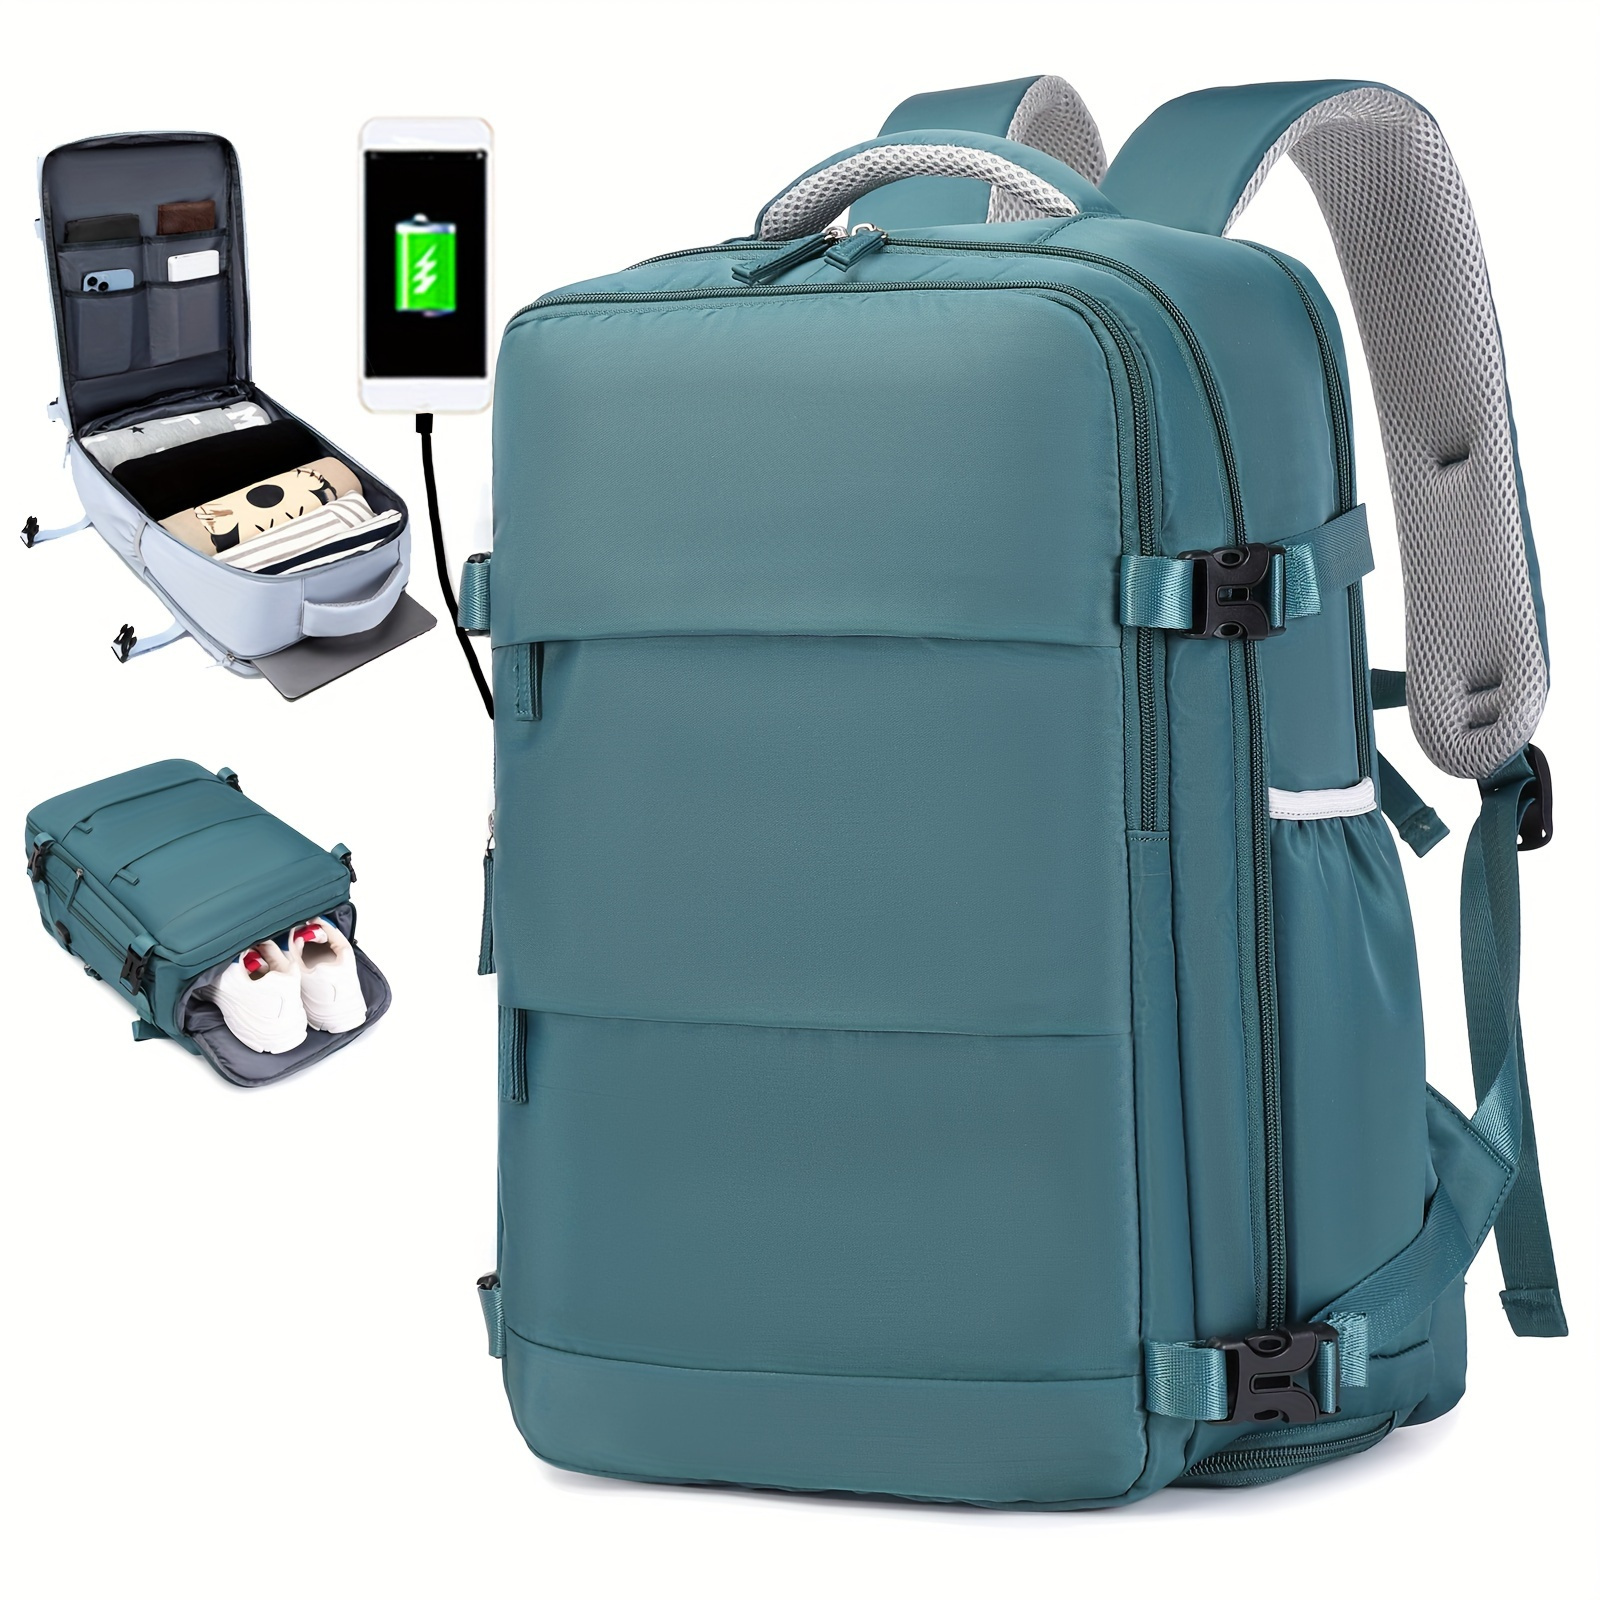 

Travel Backpack With Shoes Compartment, Expandable Luggage Bag, Large Capacity Laptop Schoolbag